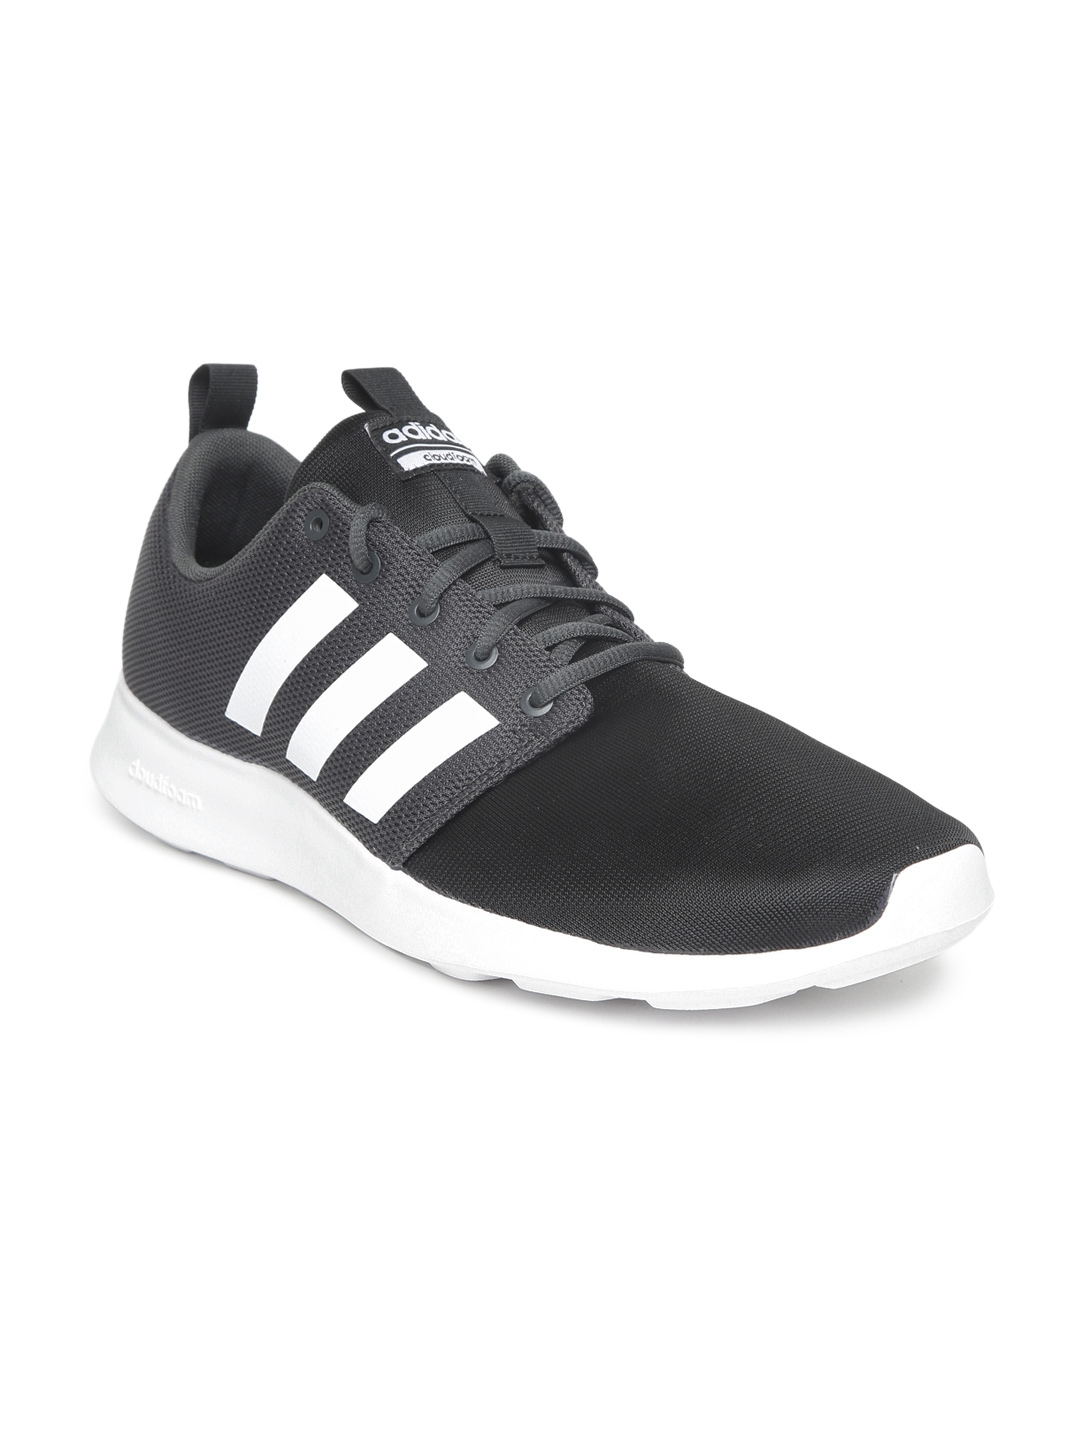 Buy ADIDAS Men Black CF Swift Racer Running Shoes - Sports Shoes for ...